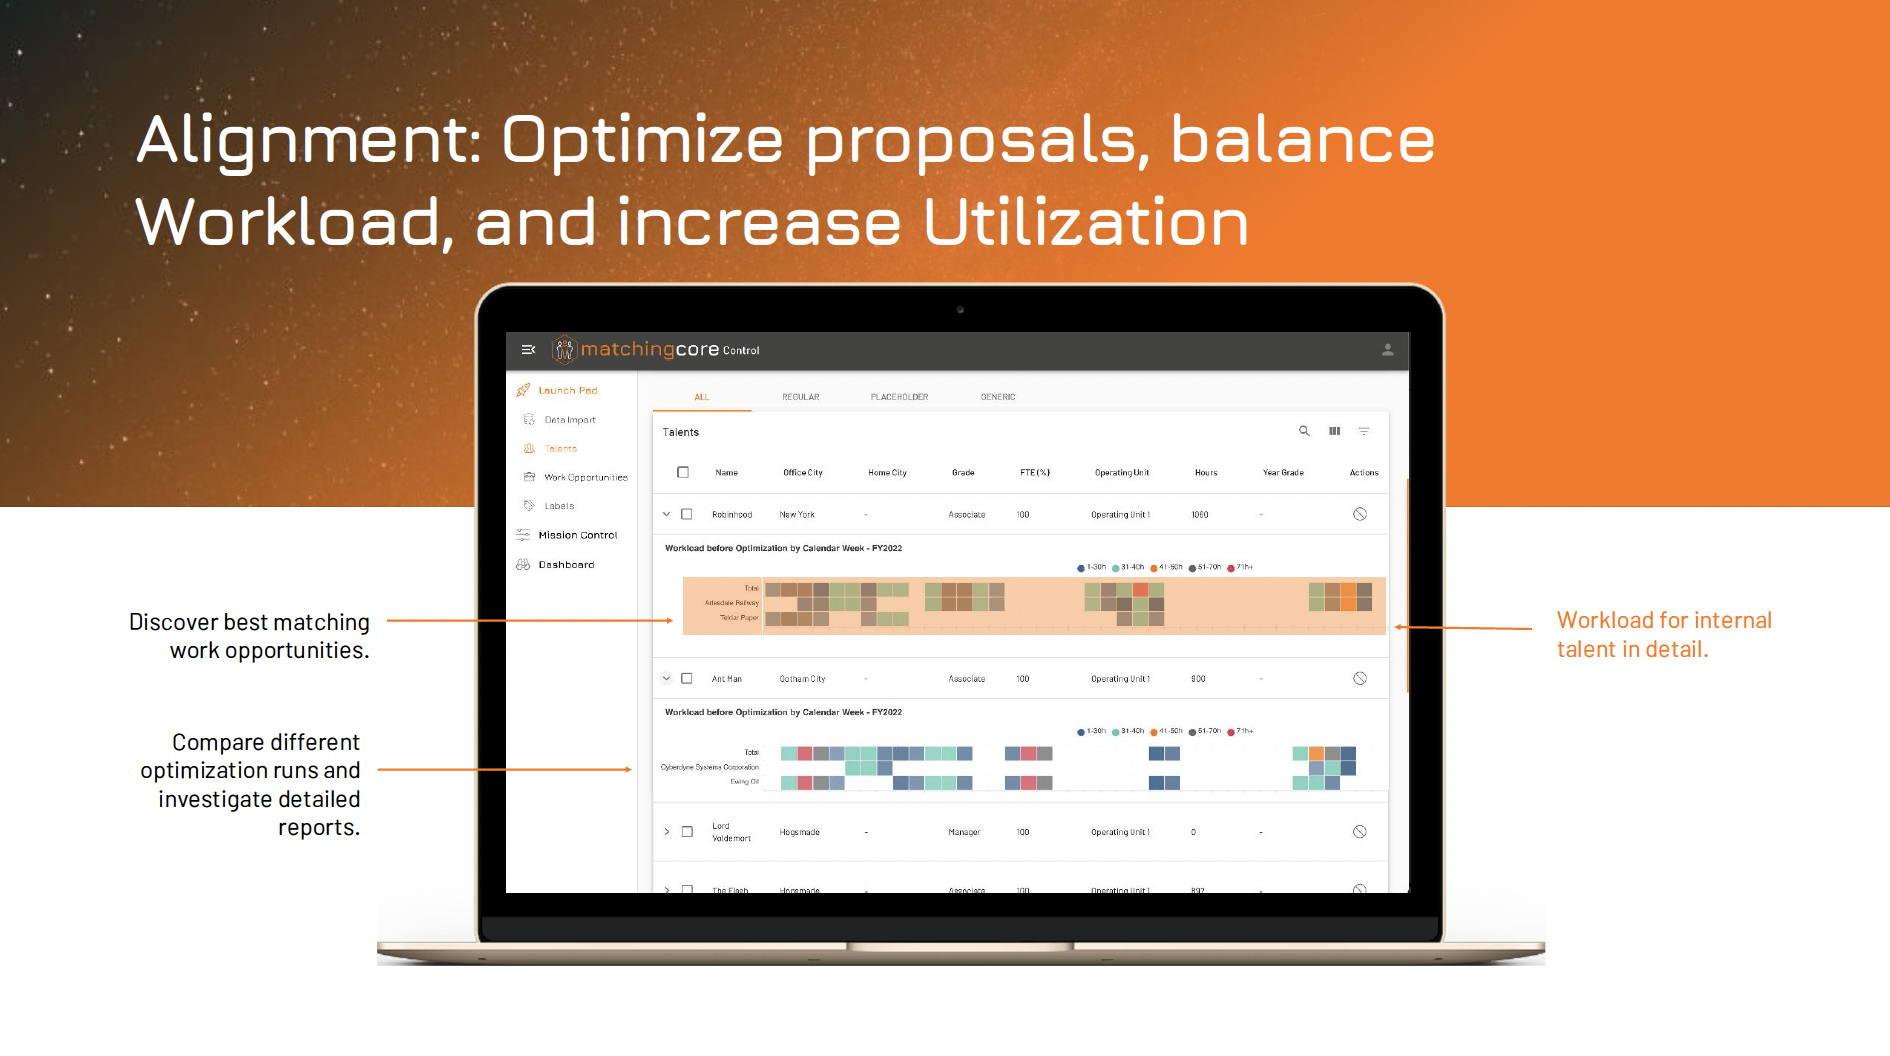 Alignment: Optimize proposals, balance Workload, and increase Utilization